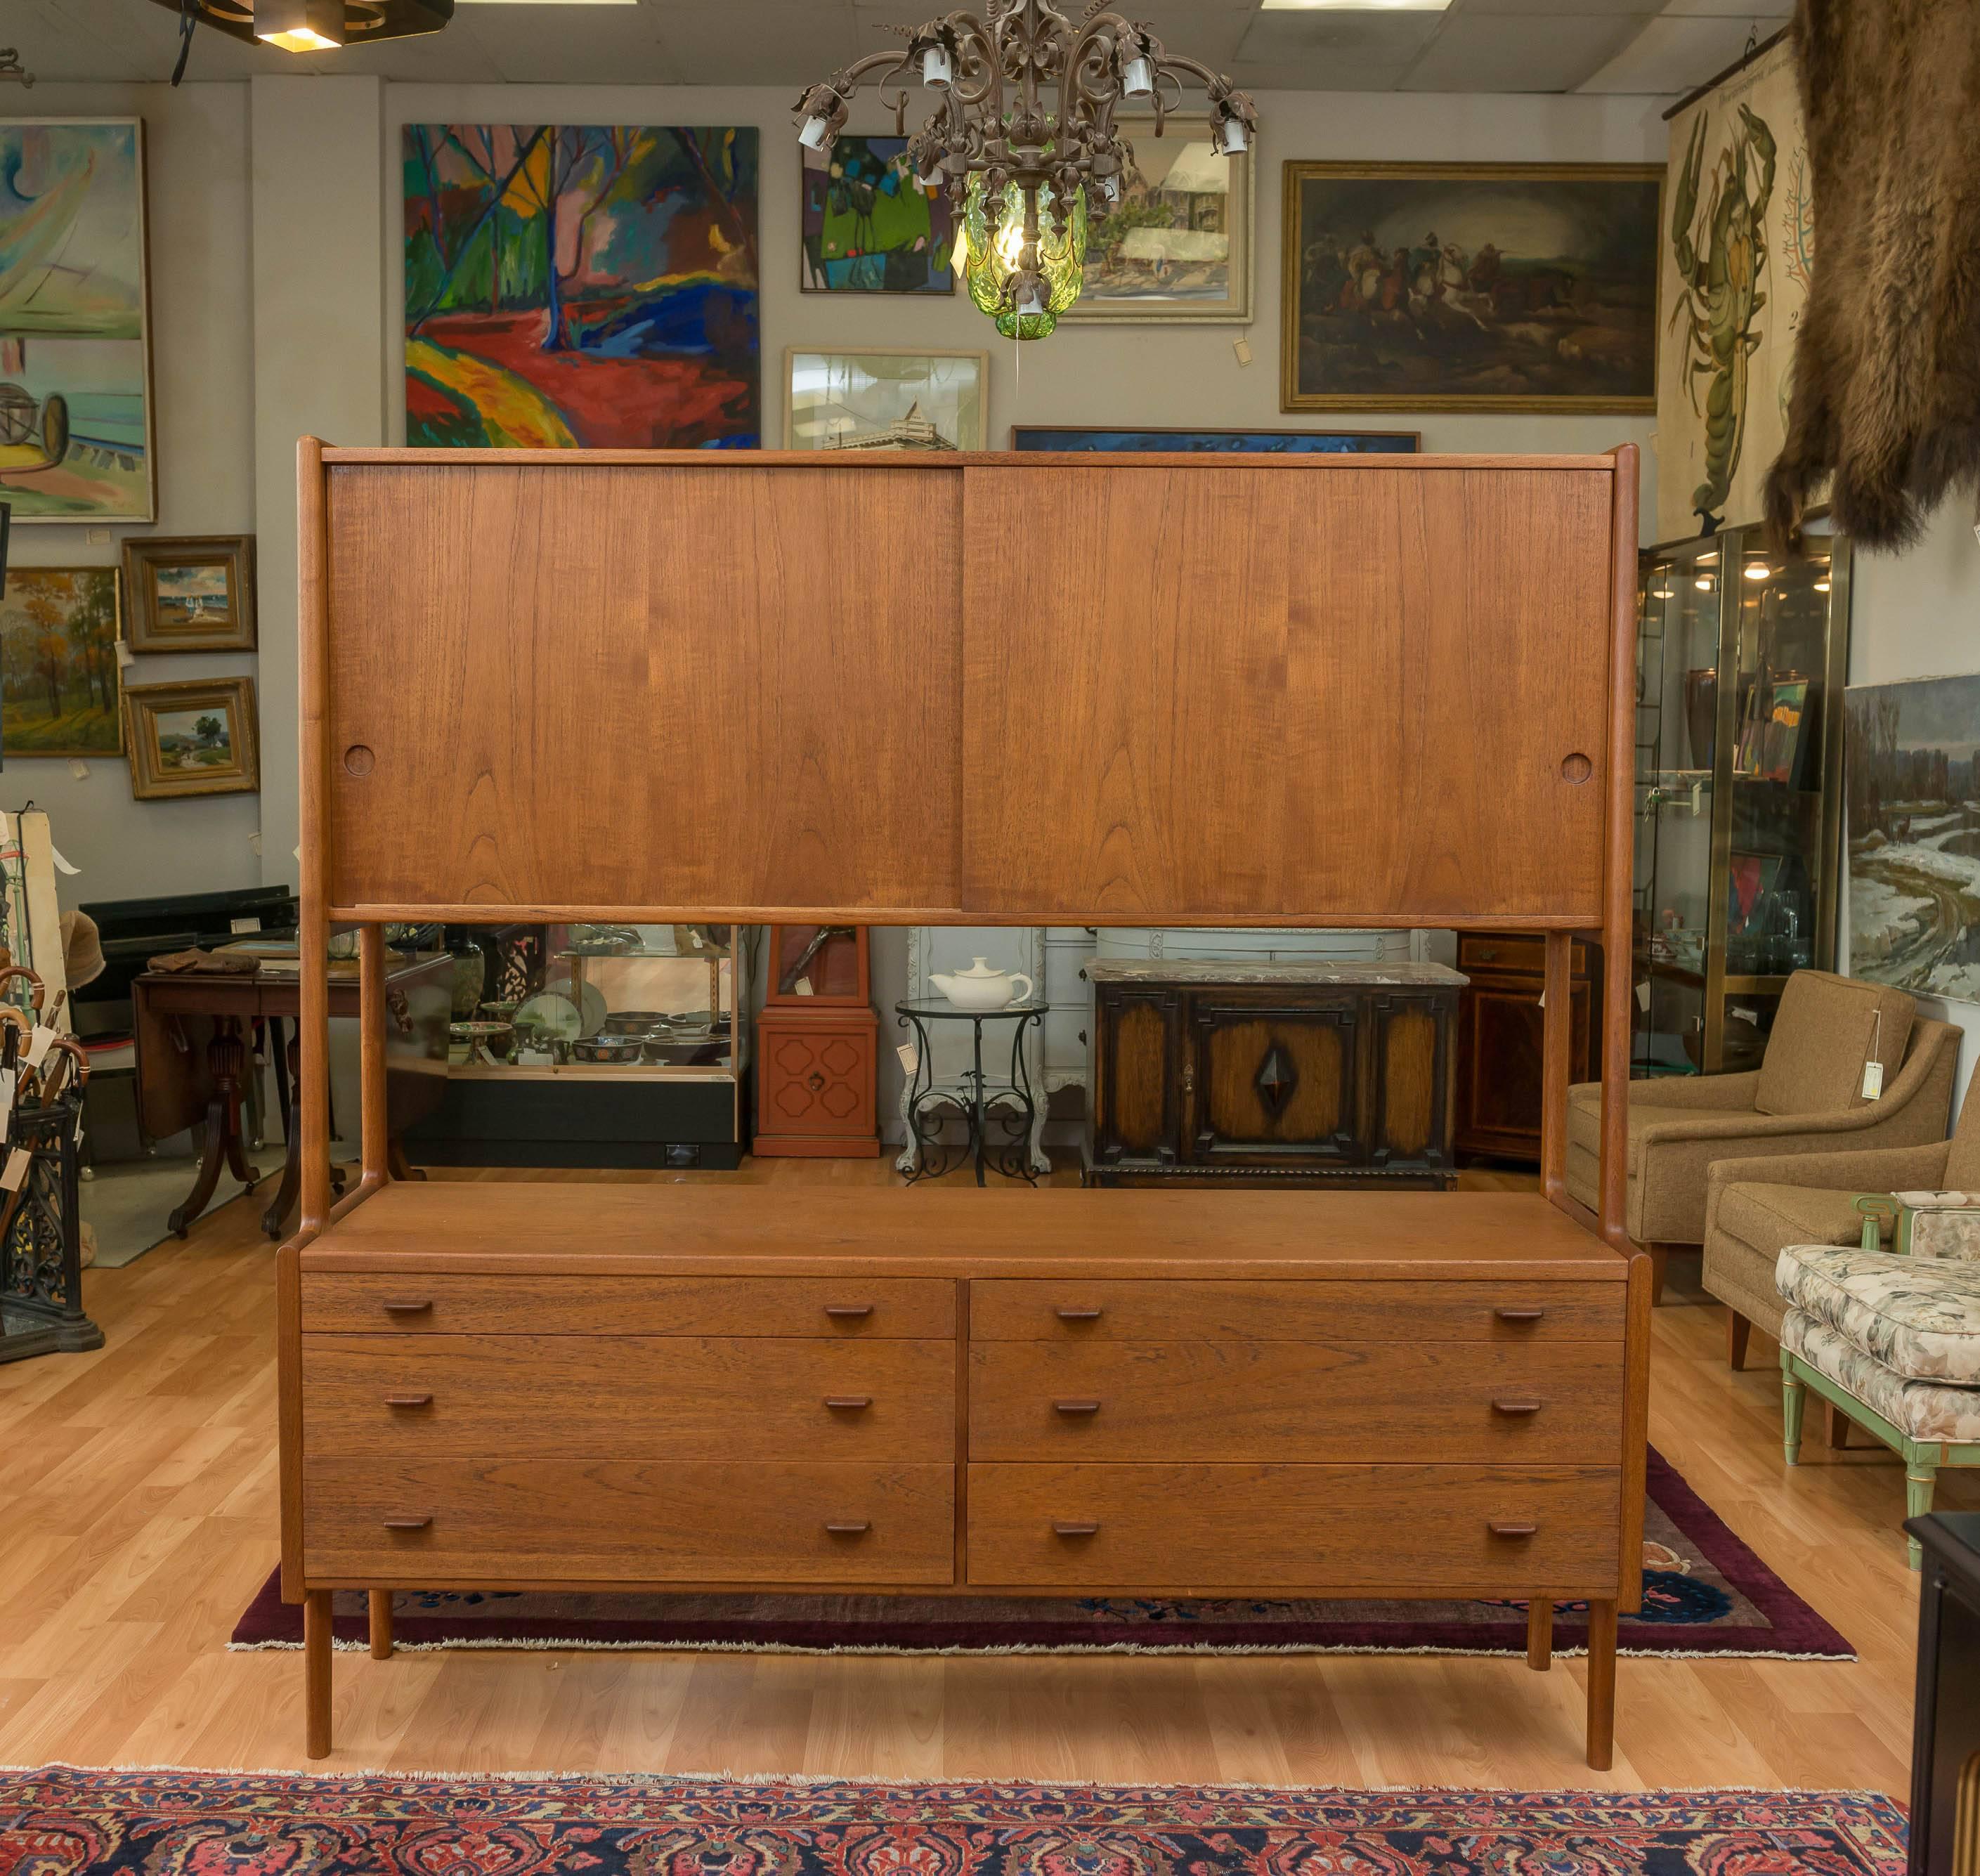 A large Hans Wegner designed Teak credenza, with enough storage space to hold it all. Upper unit has two sliding doors, behind those doors are four adjustable shelves. Lower unit has six pull tab drawers, with the top left drawer has a Green felt